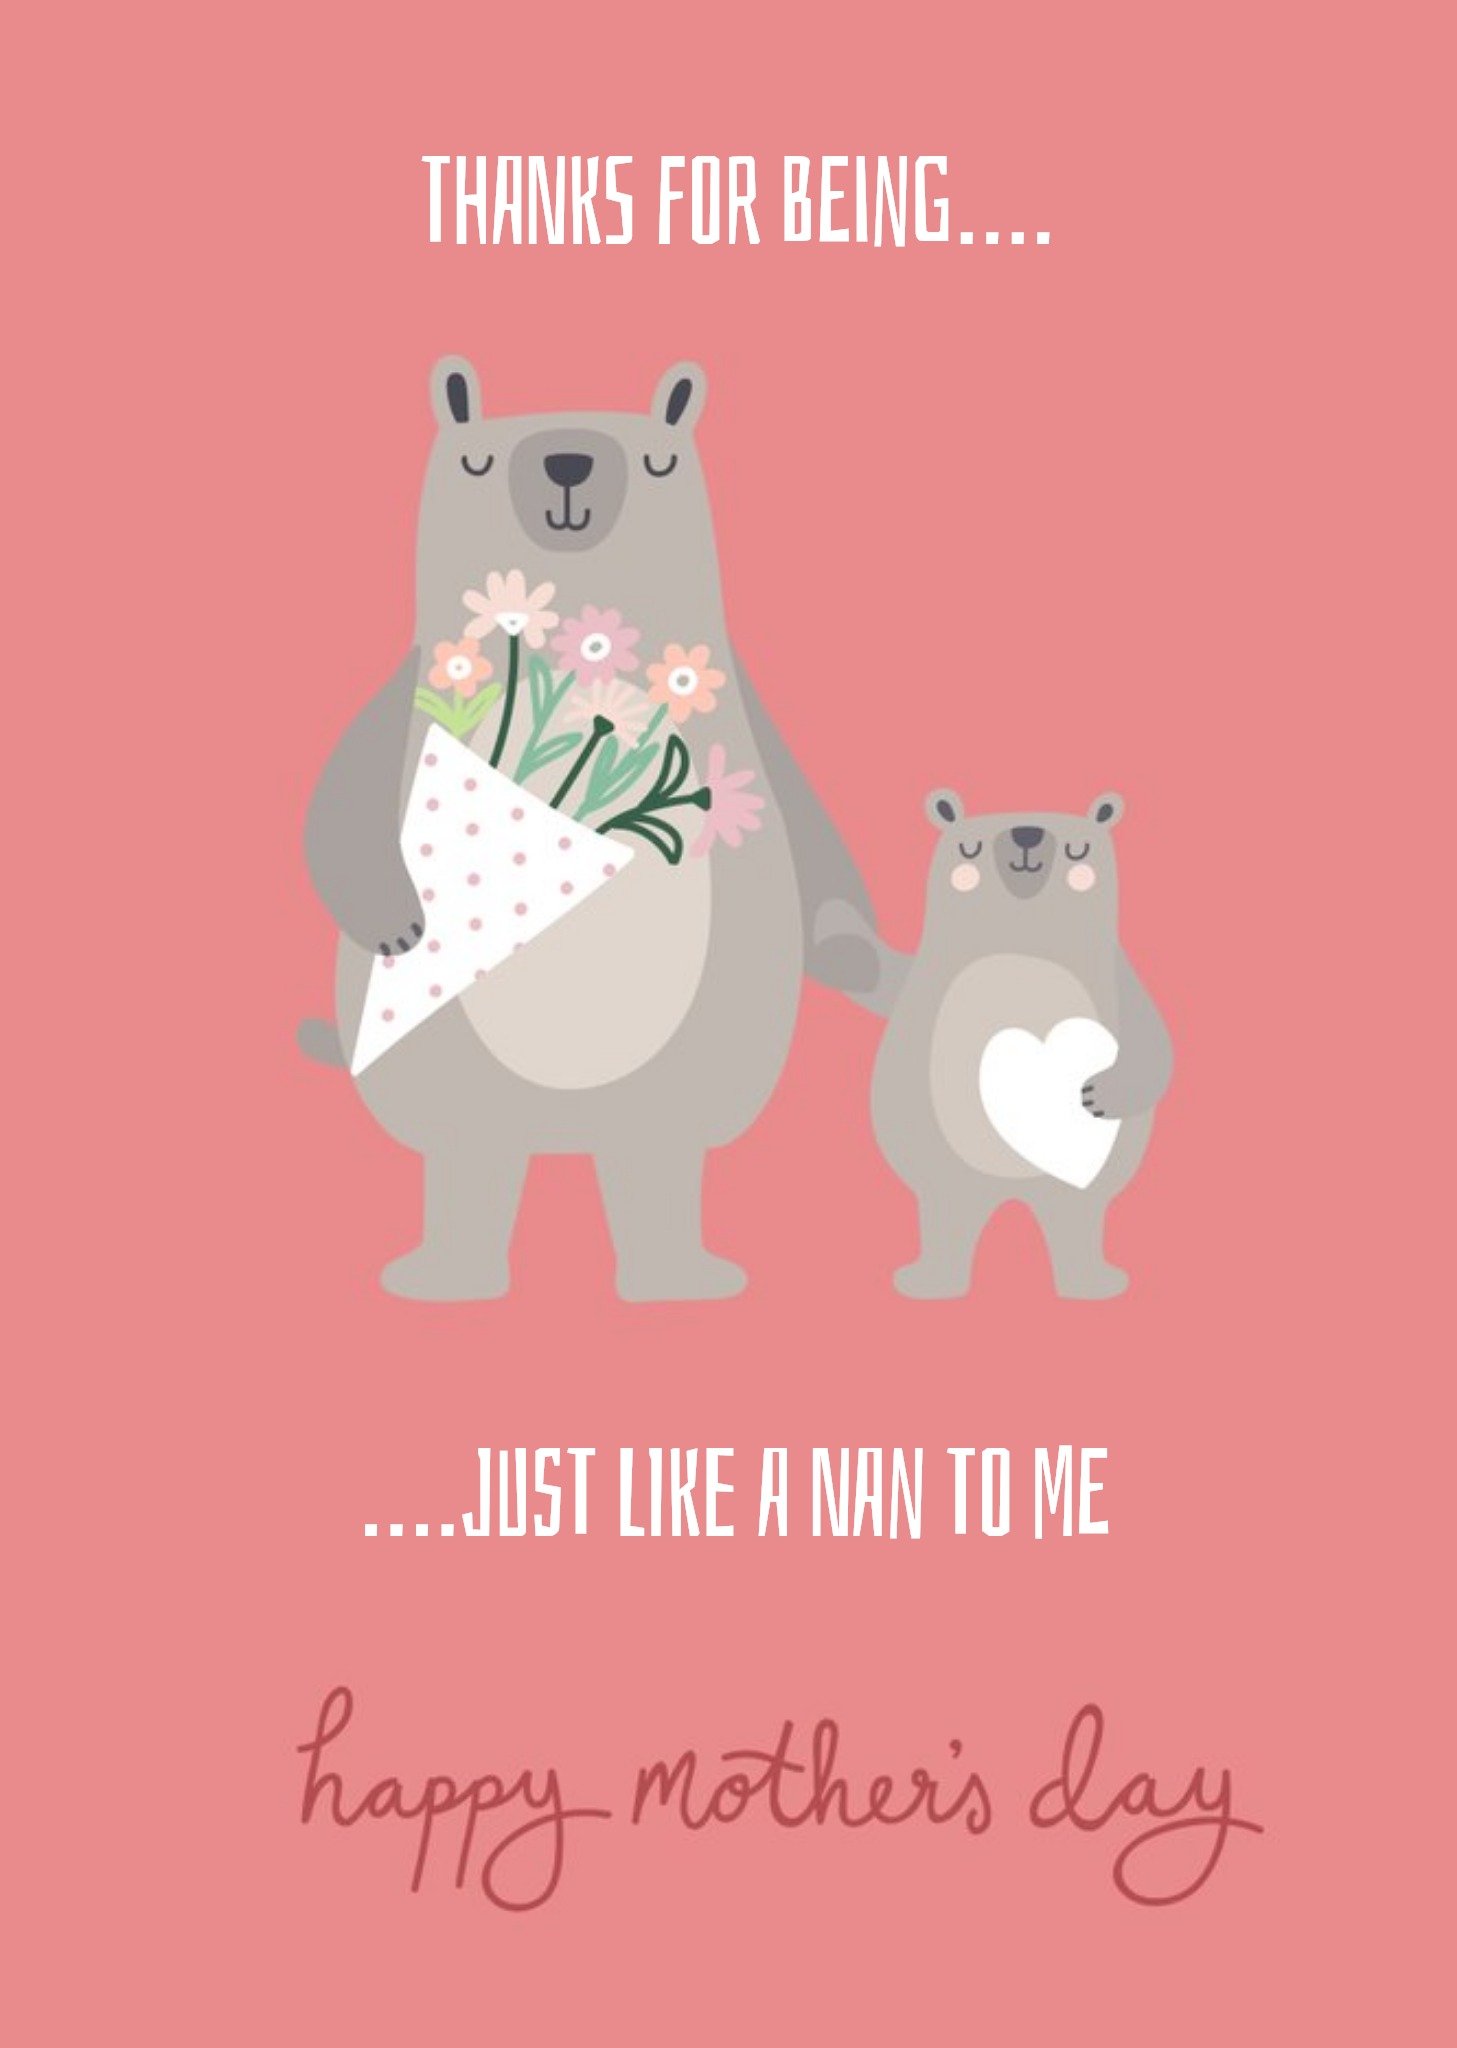 Moonpig Cute Bears Thank You For Being Just Like A Nan Mother's Day Card Ecard